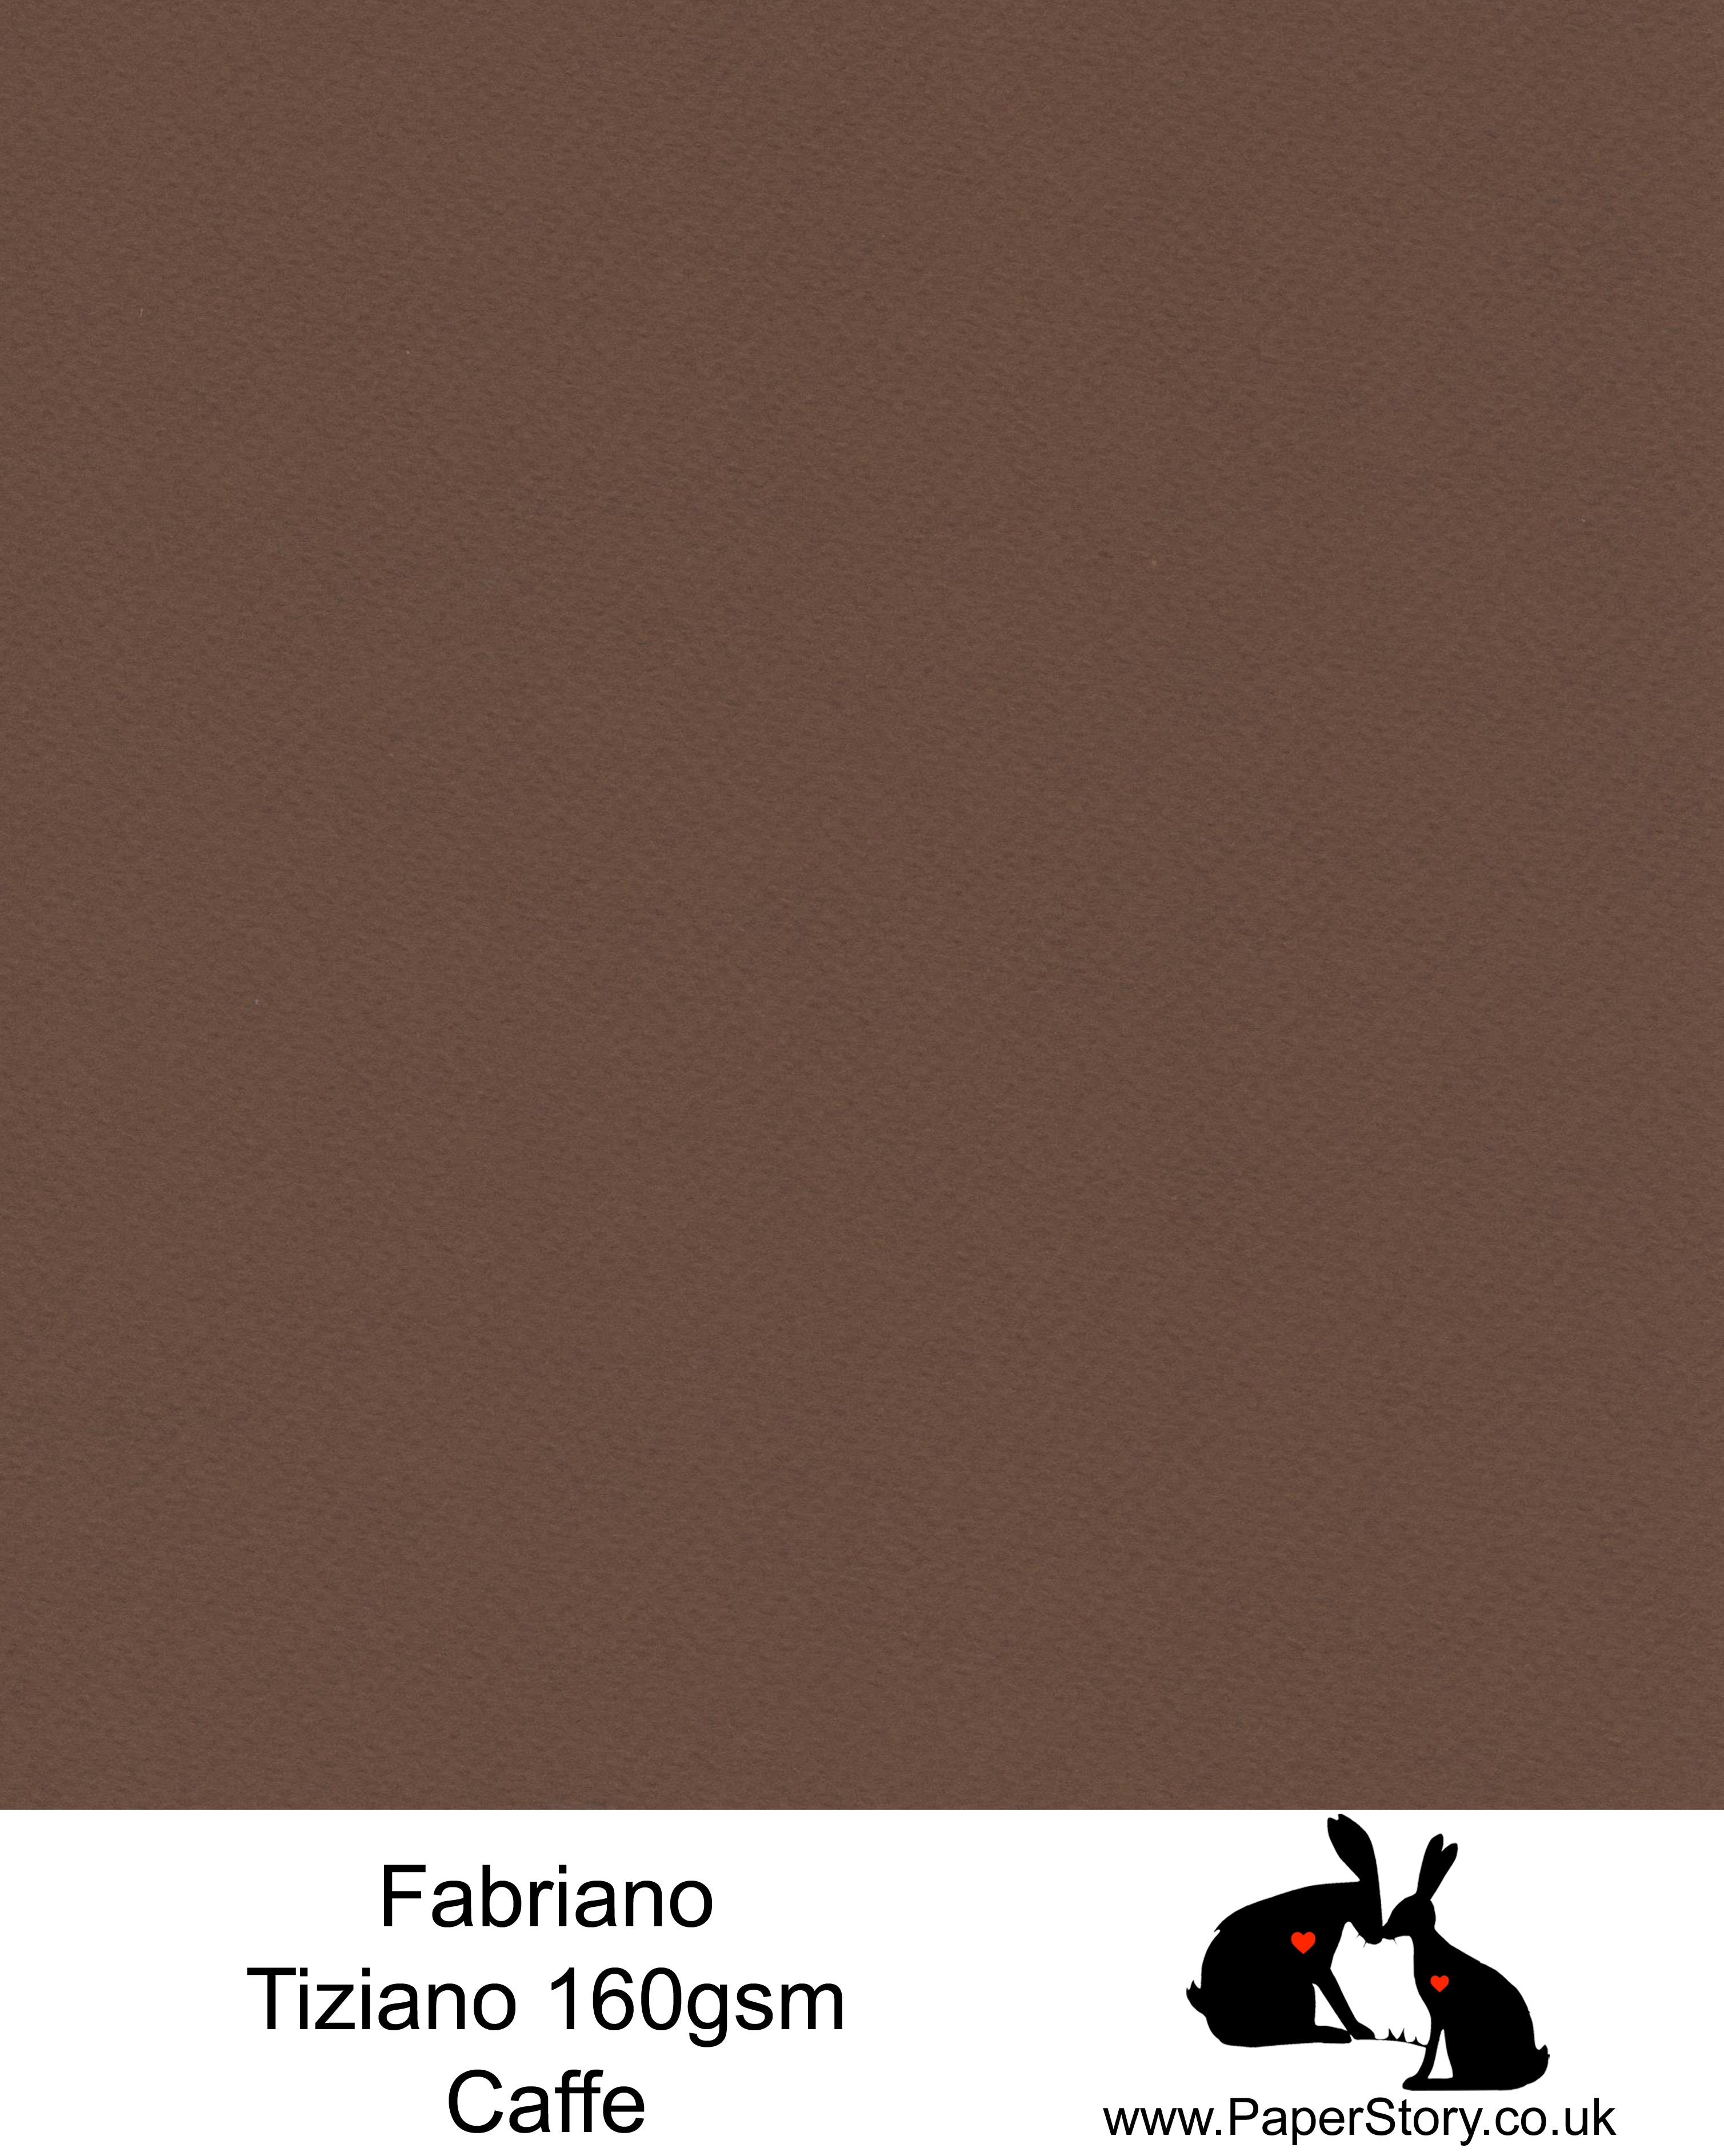 High quality paper from Italy, Caffe, deep chocolate brown Fabriano Tiziano is 160 gsm, Tiziano has a high cotton content, a textured naturally sized surface. This paper is acid free to guarantee long permanence in time, pH neutral. It has highly lightfast colours, an excellent surface making and sizing which make this paper particularly suitable for papercutting, pastels, pencil, graphite, charcoal, tempera, air brush and watercolour techniques. Tiziano can be used for all printing techniques.